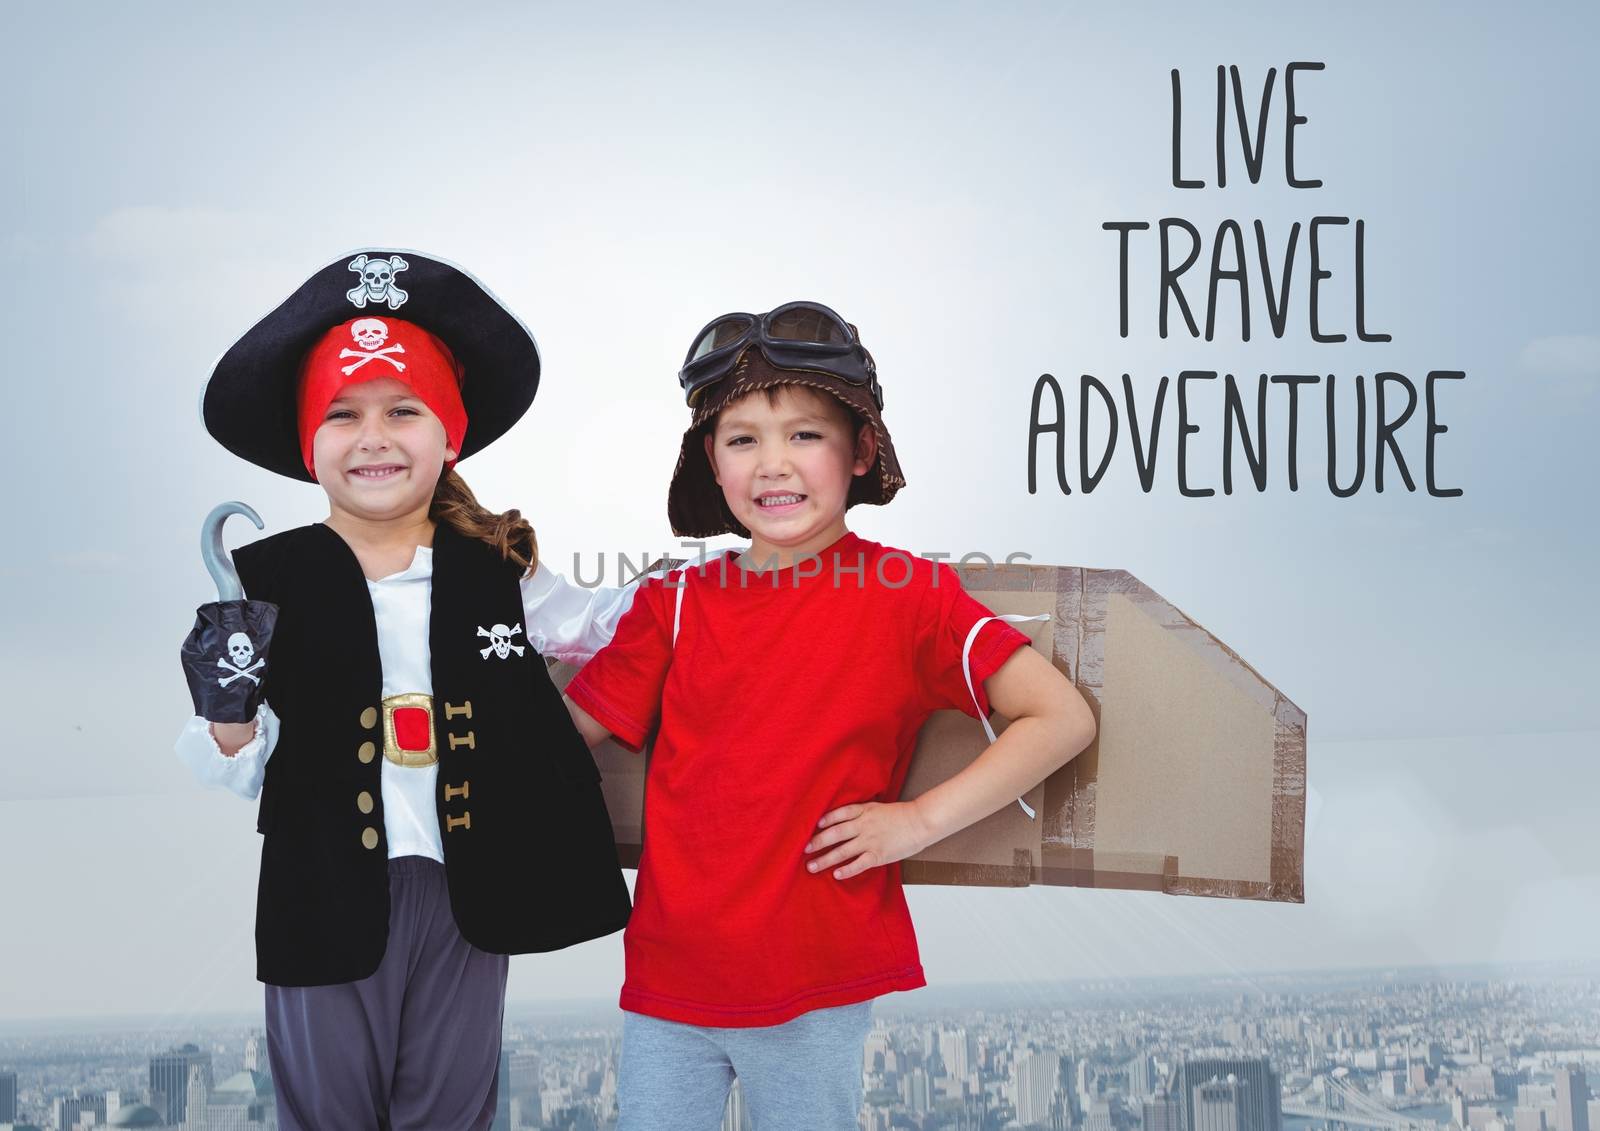 Live travel adventure text with Kids in pirate and pilot costumes over city by Wavebreakmedia